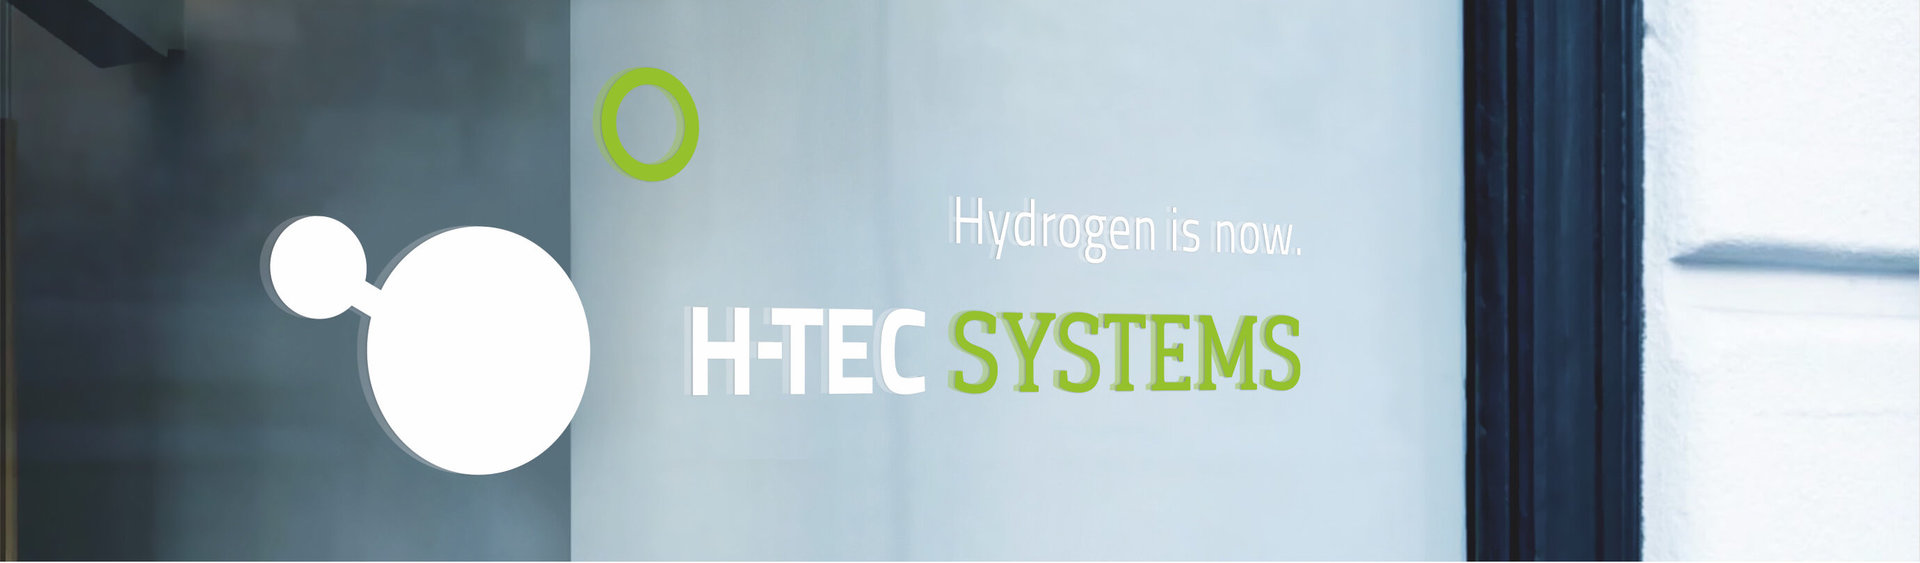 Sites and contact information: H-TEC SYSTEMS contact